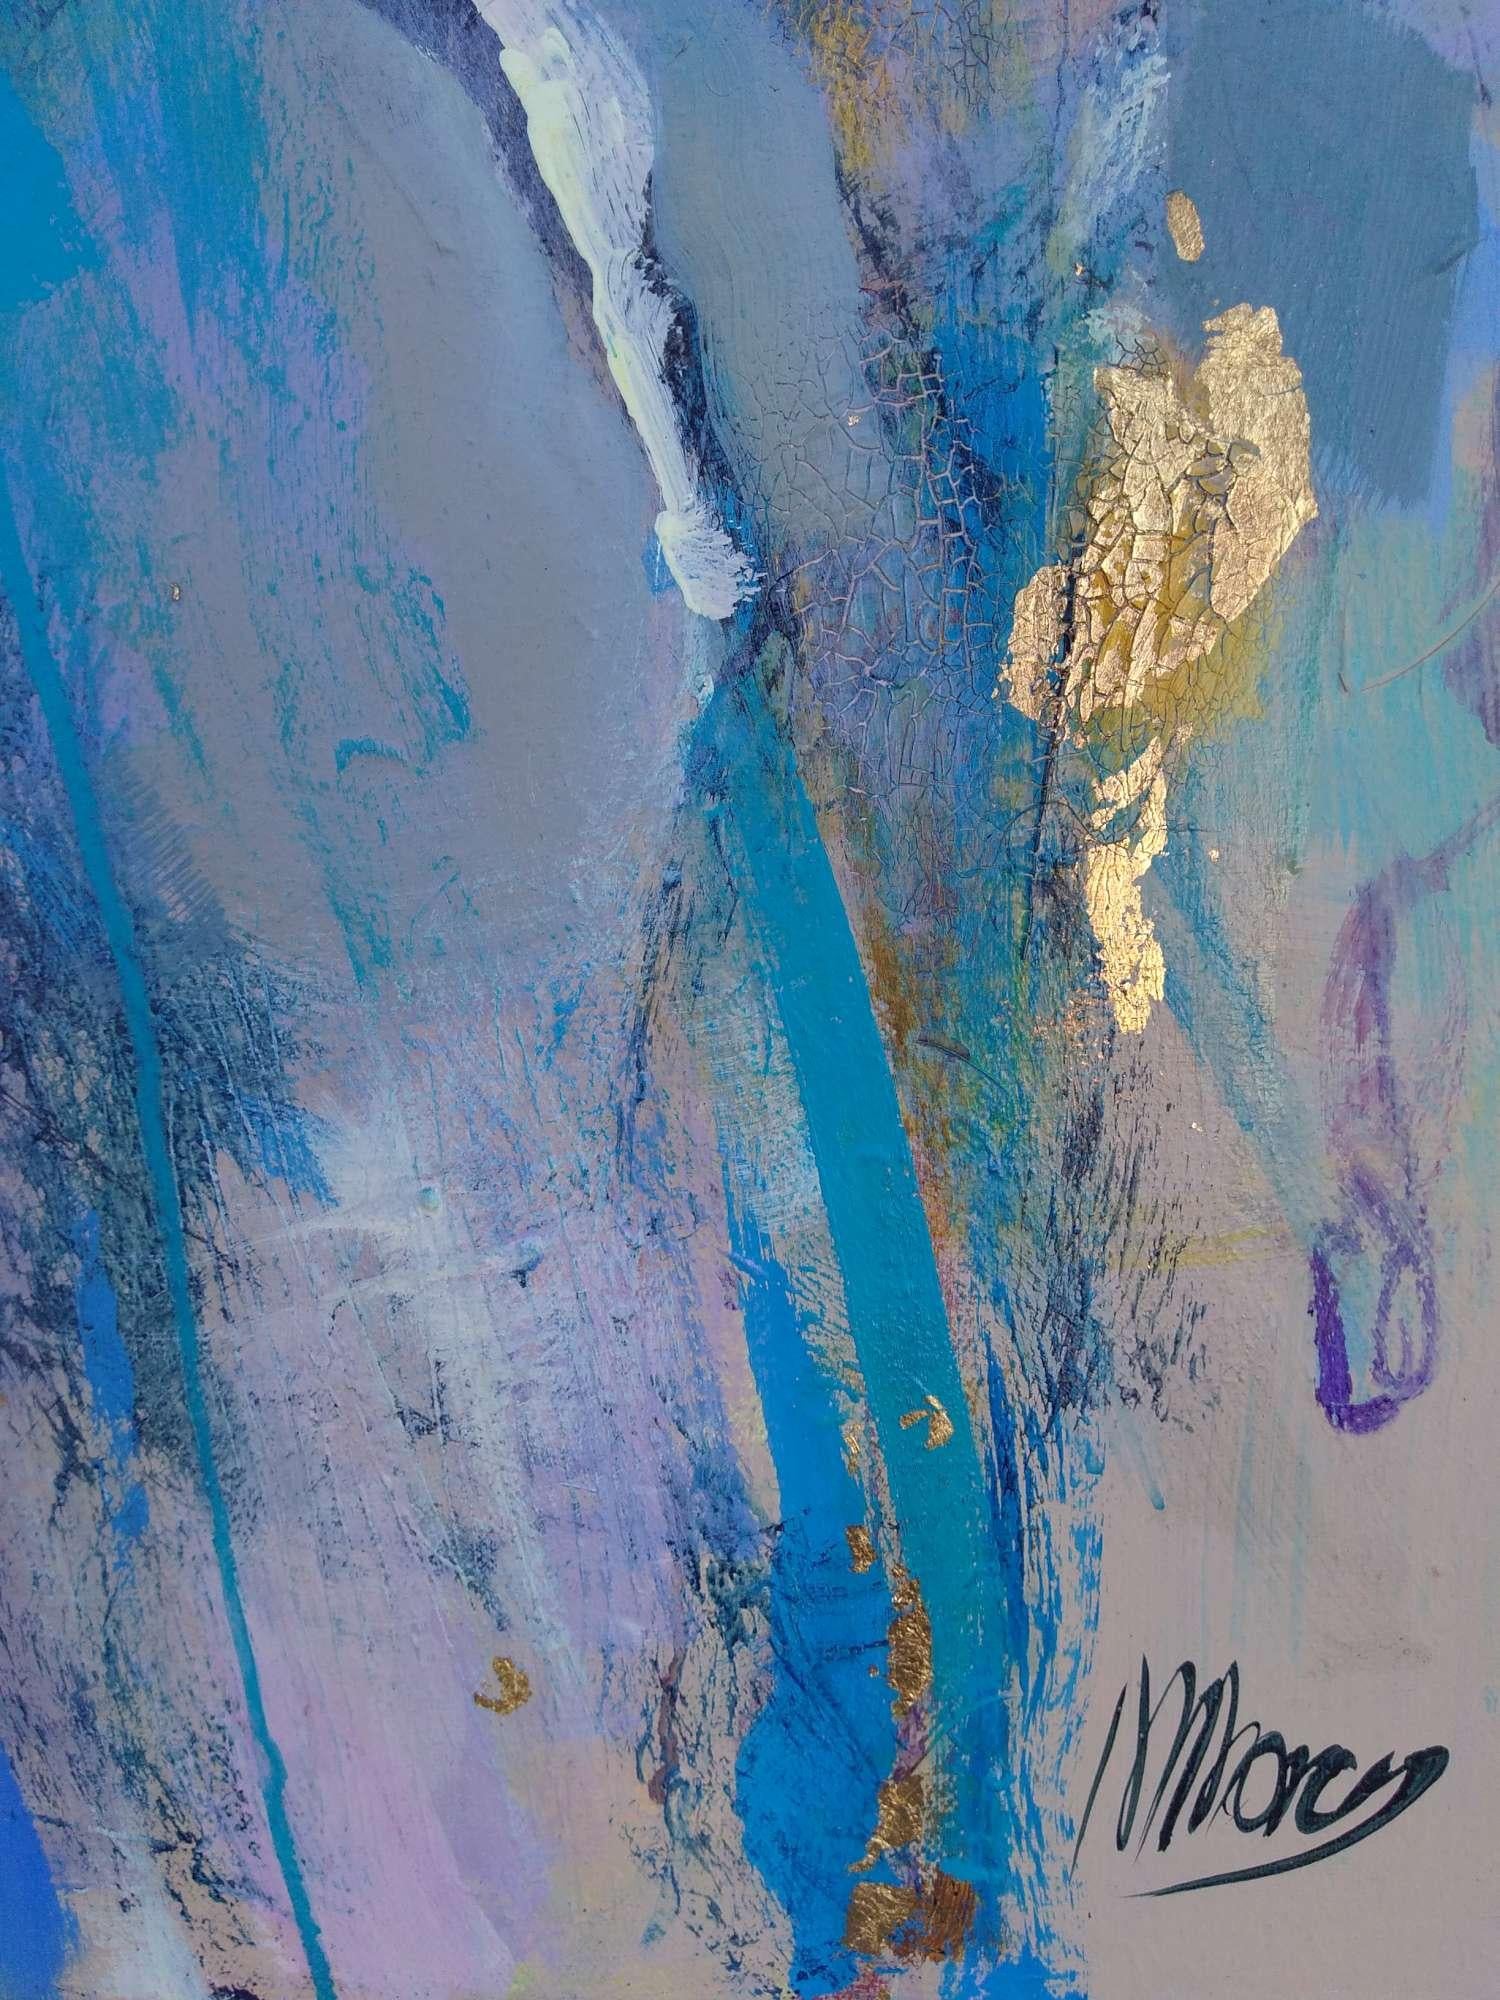 This is a figurative all about contrasts: the cracked, stony texture contrasting with the smooth sensuality of the subject and the cool turquoises contrasting with the warm gold and soft lavender hues. She is alive and glad to be so! 

This original